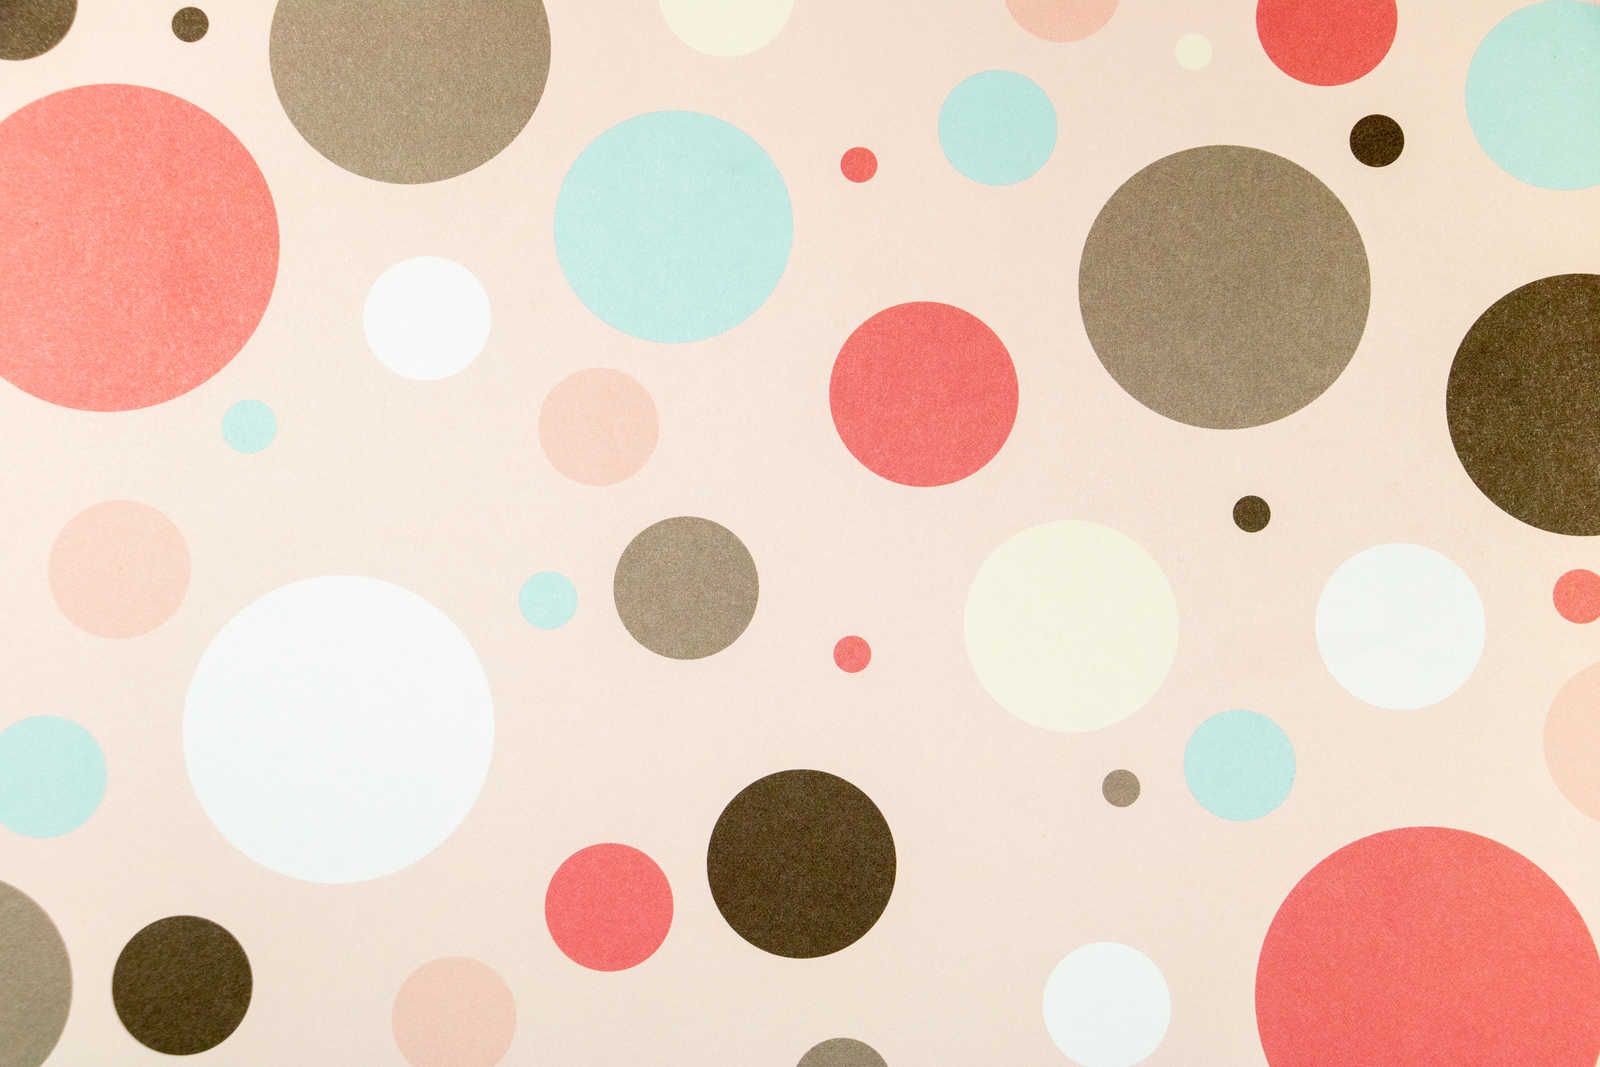             Canvas for children's room with colourful circles - 90 cm x 60 cm
        